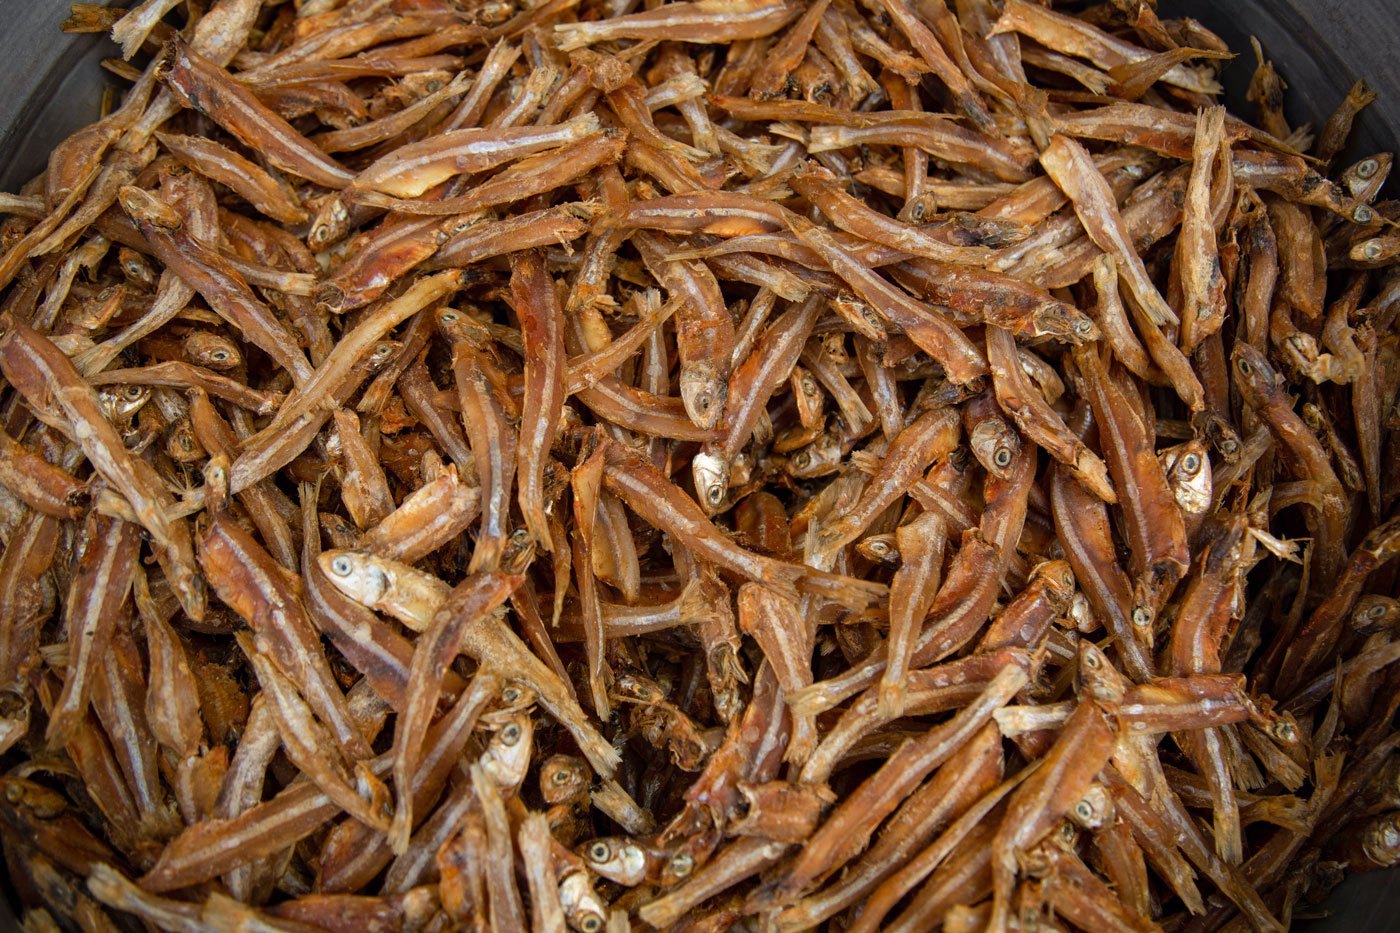 Salted and sun dried fish